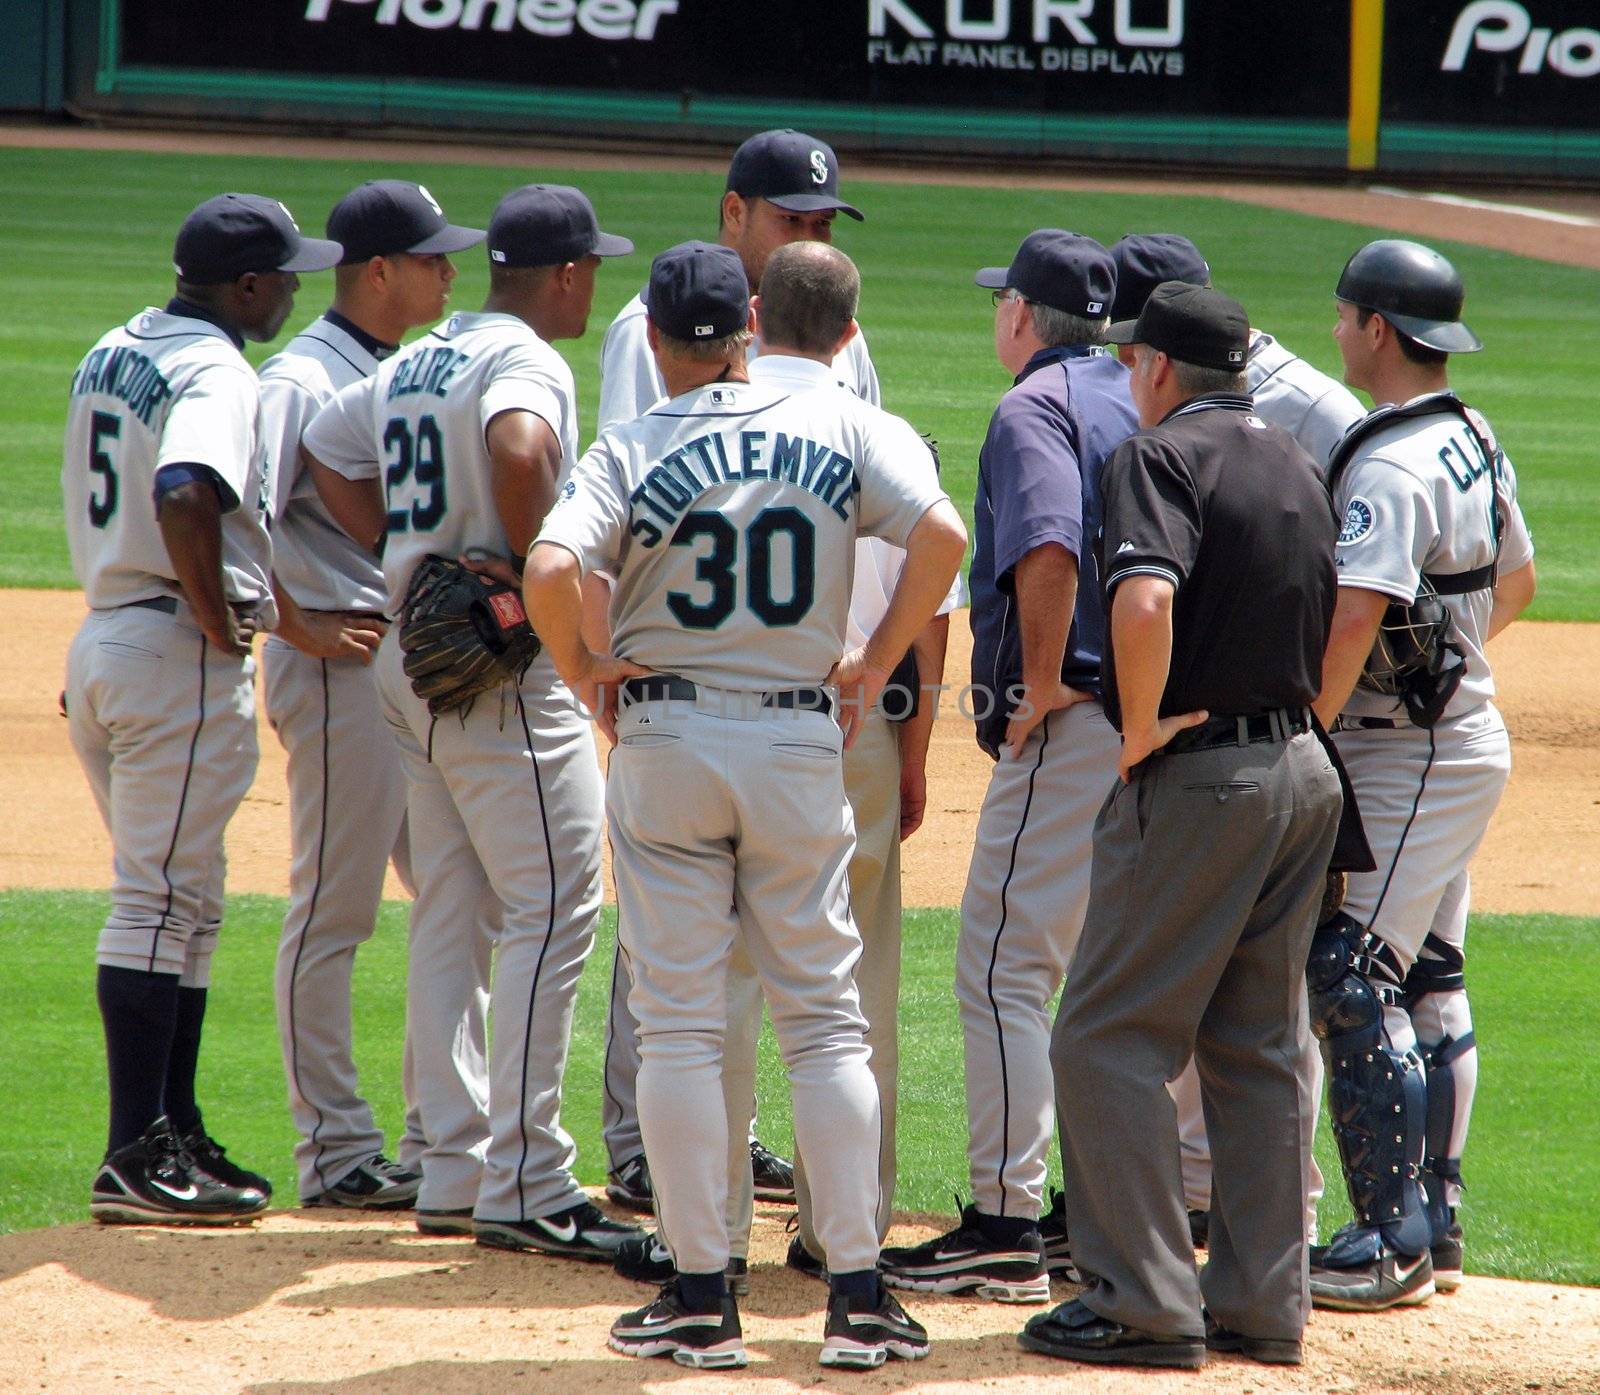 The Seattle Mariners players and coach have a conference on the pitchers mound at a game on May 13, 2008 in Arlington, Texas against the Rangers.